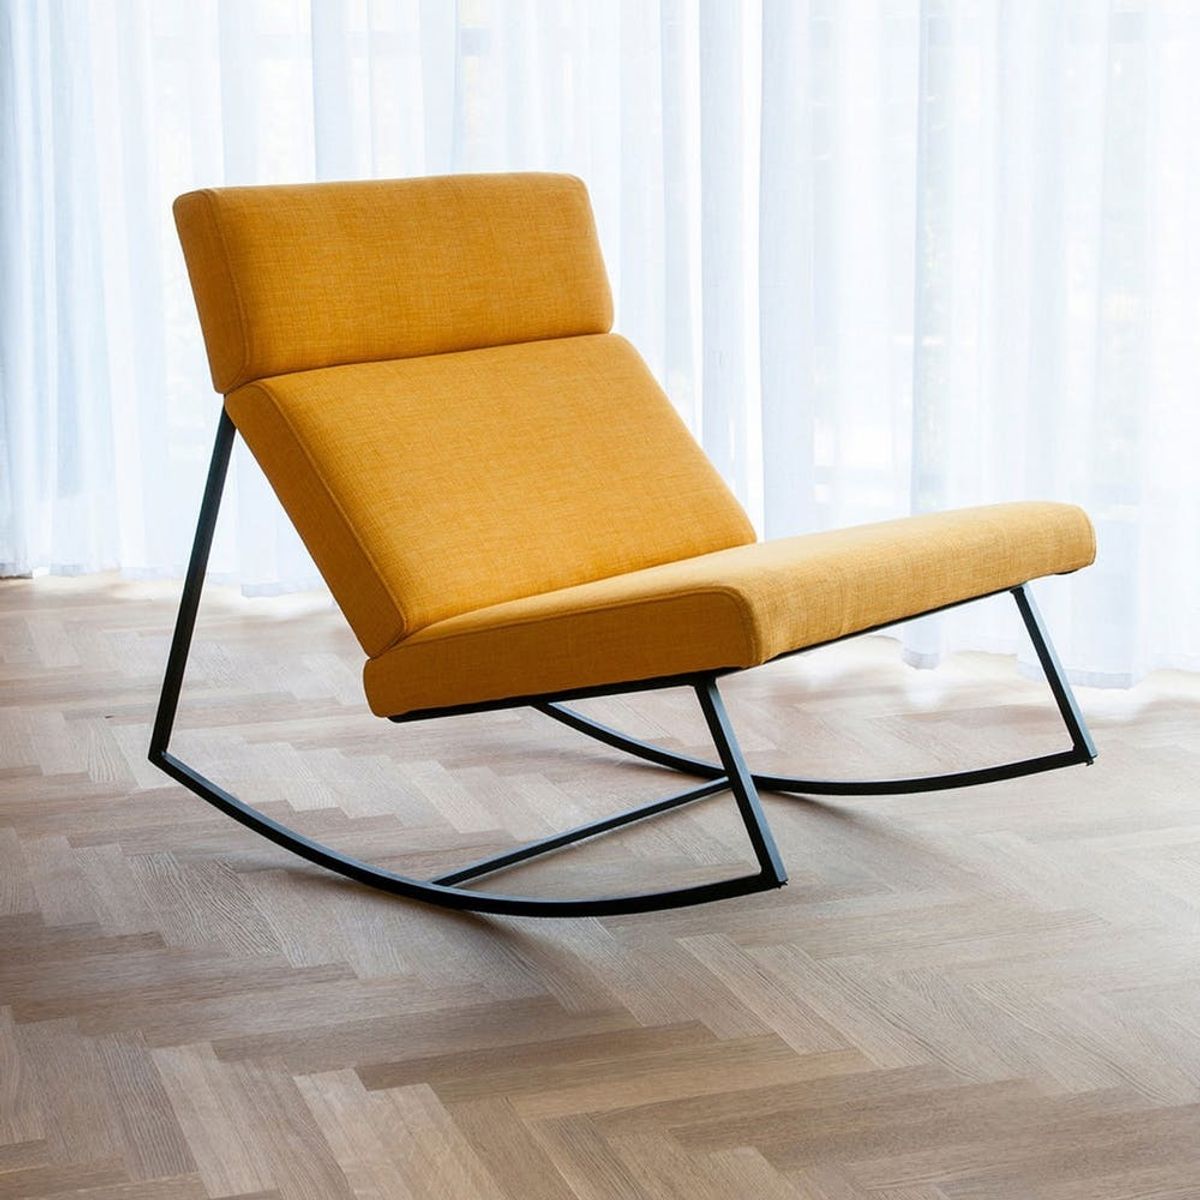 10 Modern Rocking Chairs for New Parents